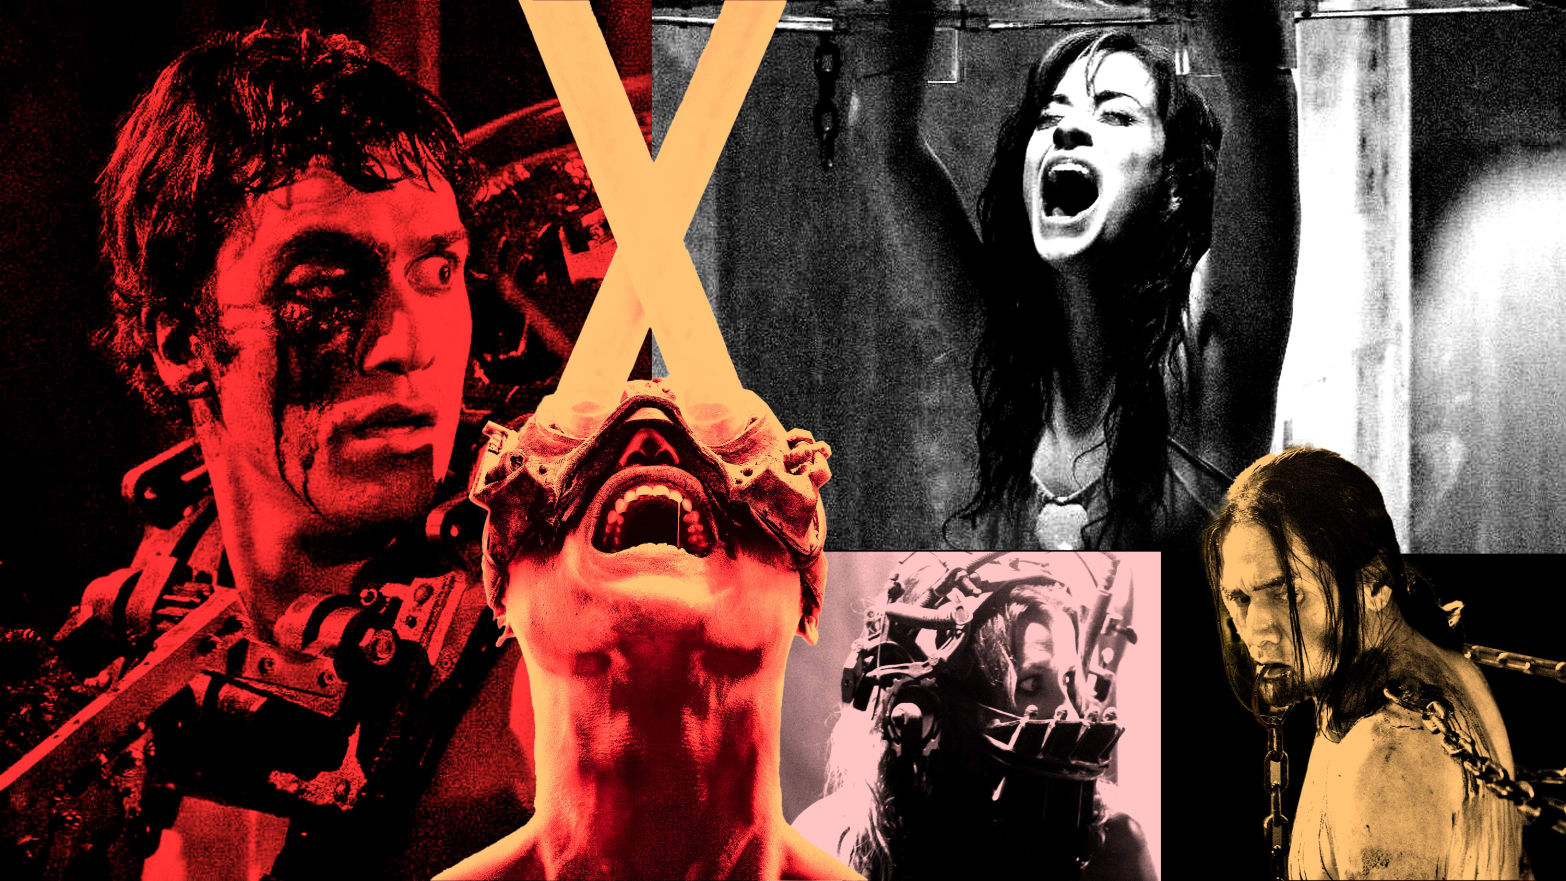 Saw X revives franchise with gruesome horror – THE MERCURY